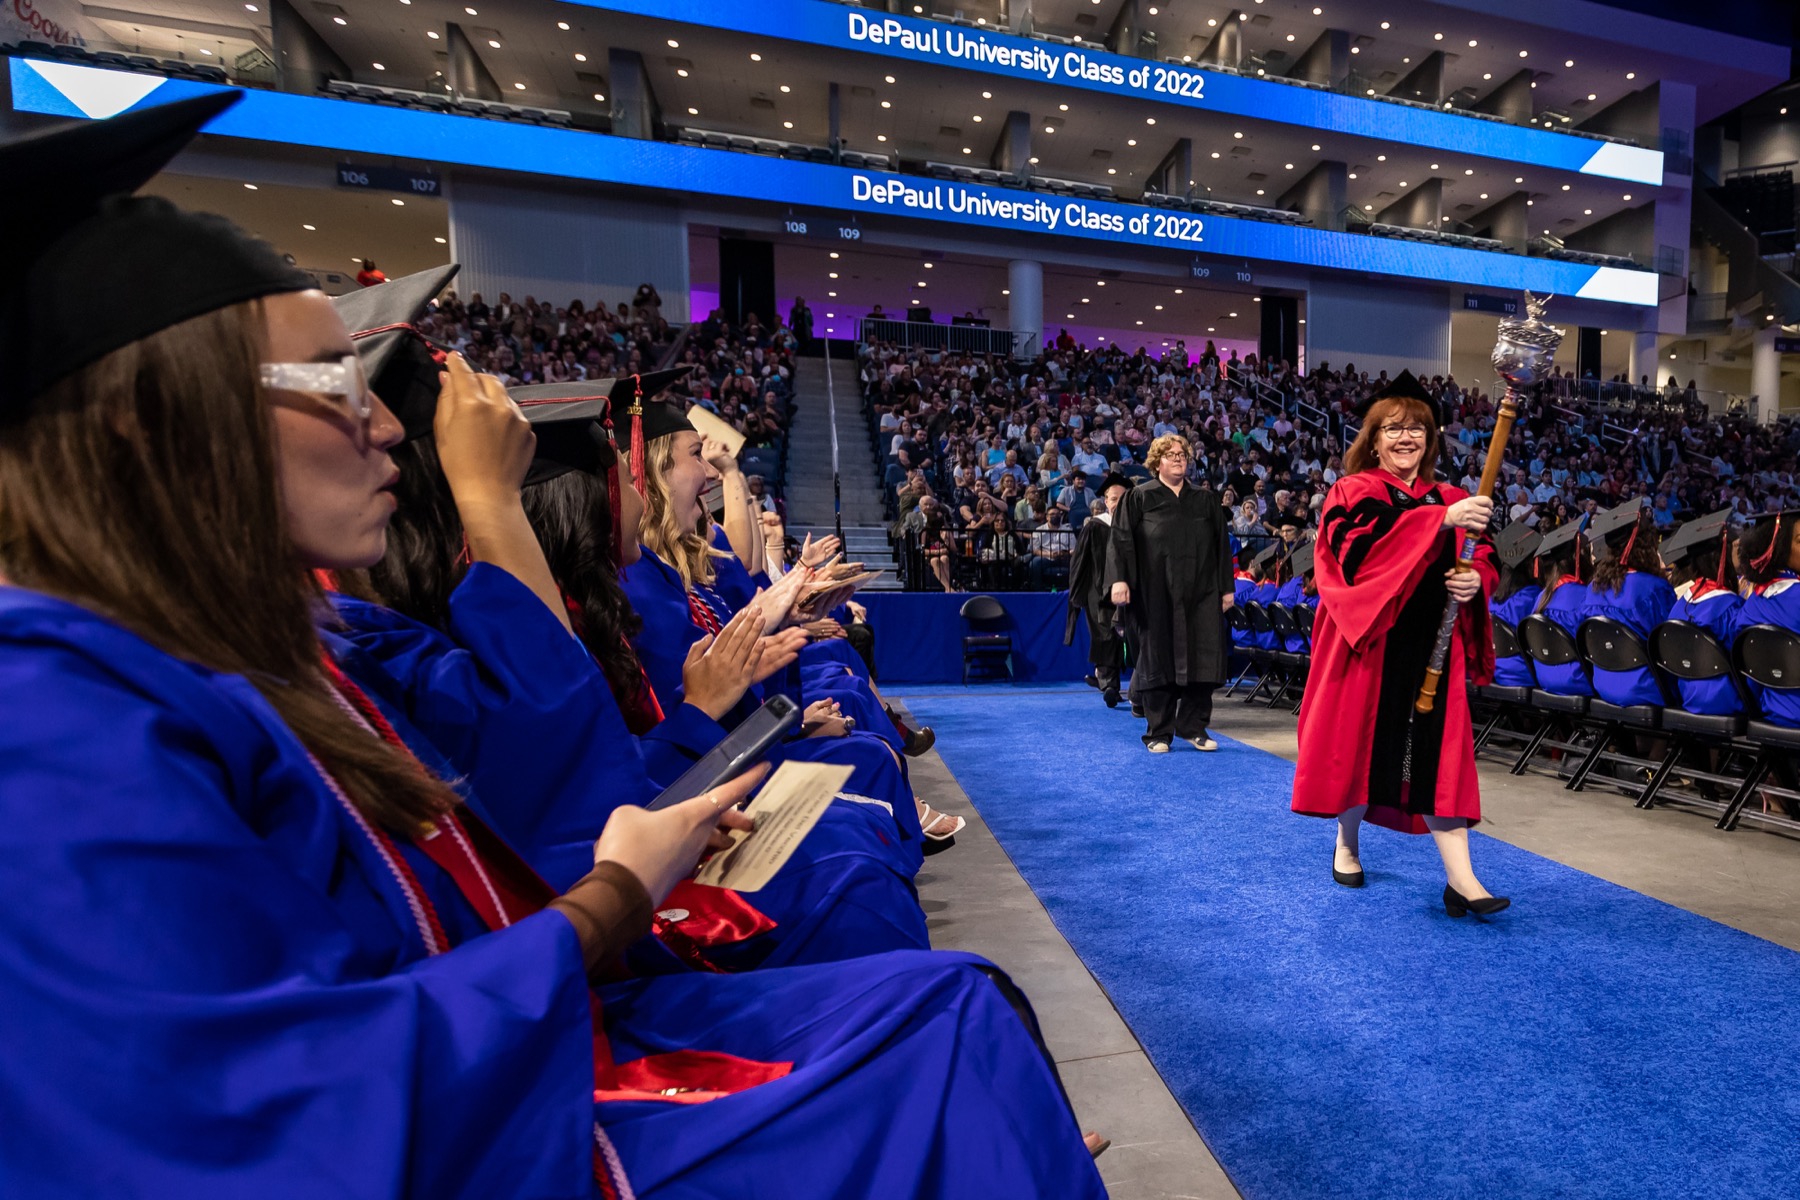 Marie Donovan, associate professor in the College of Education, holding the university mace, lead the procession at the College of Education/College of Communication ceremony.